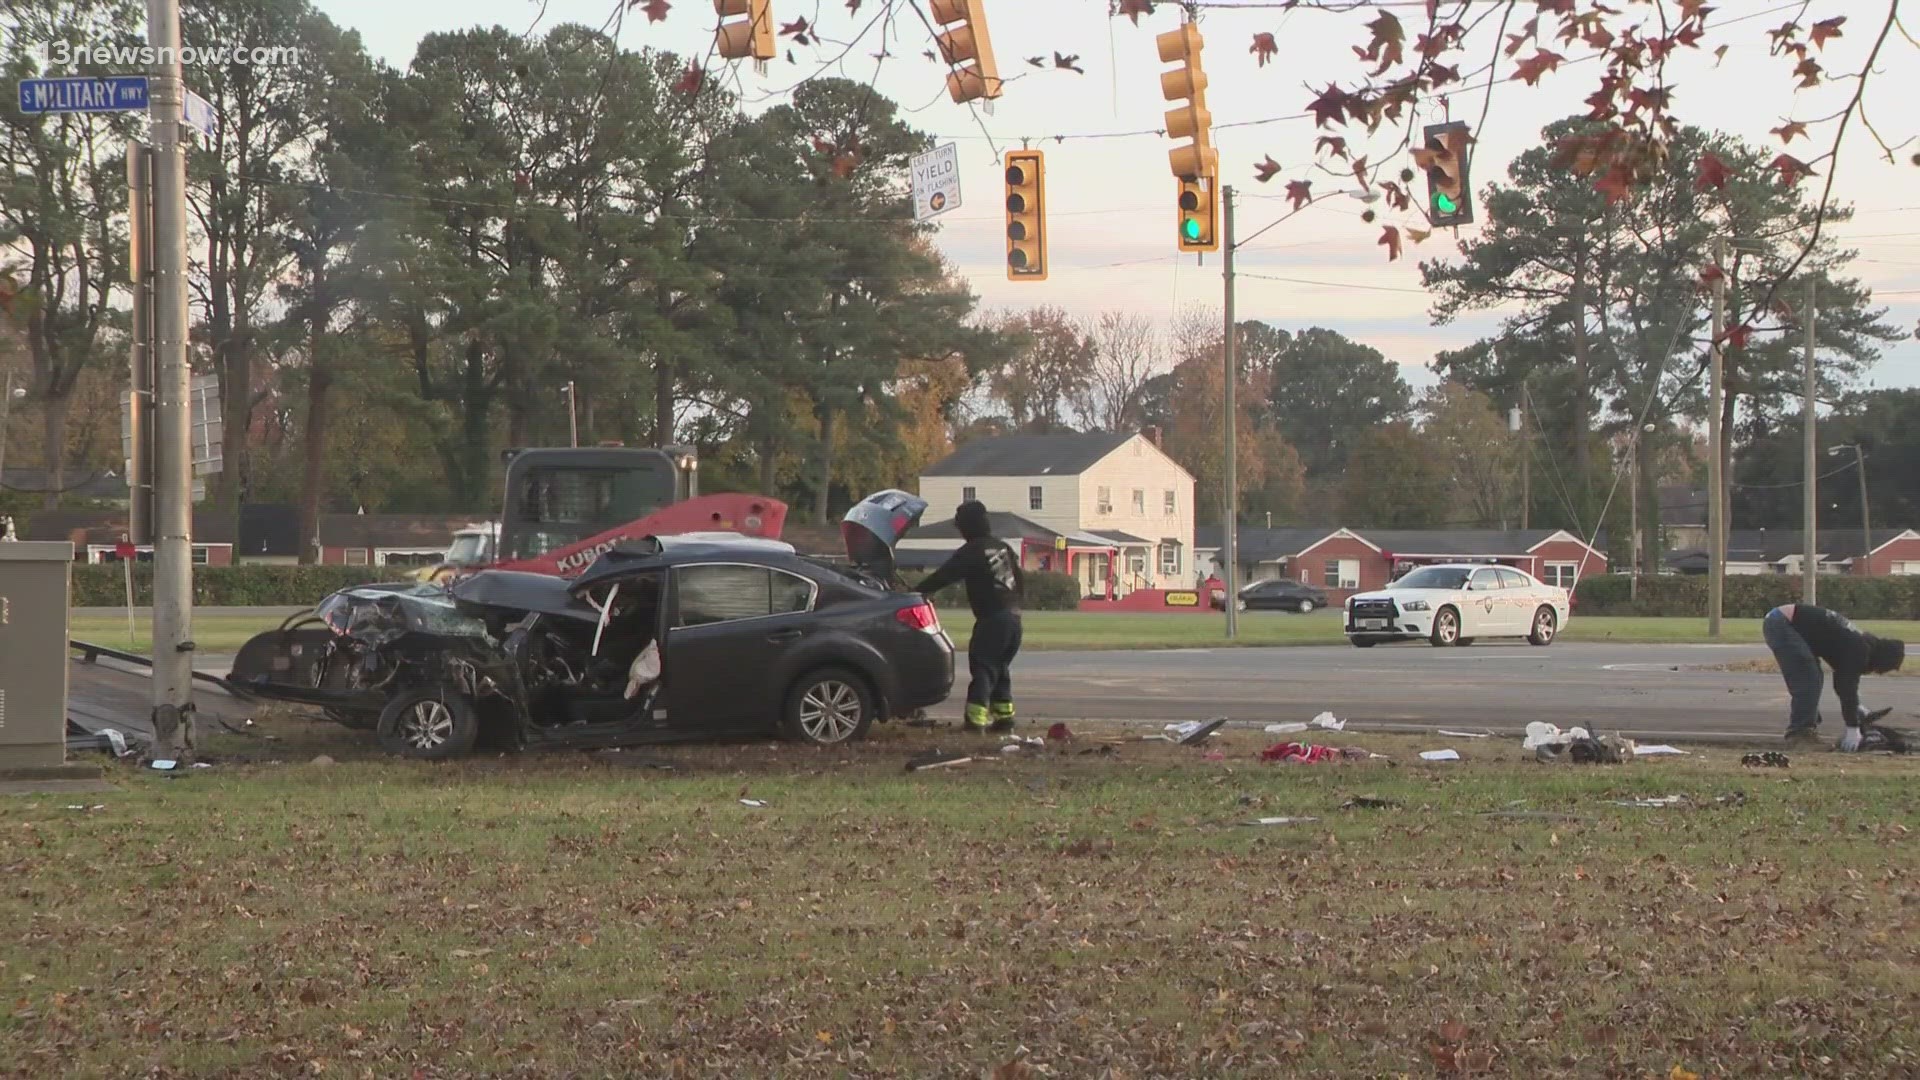 A man died after police say he didn't stop for officers trying to pull him over in the Deep Creek area. The crash also injured an innocent bystander.